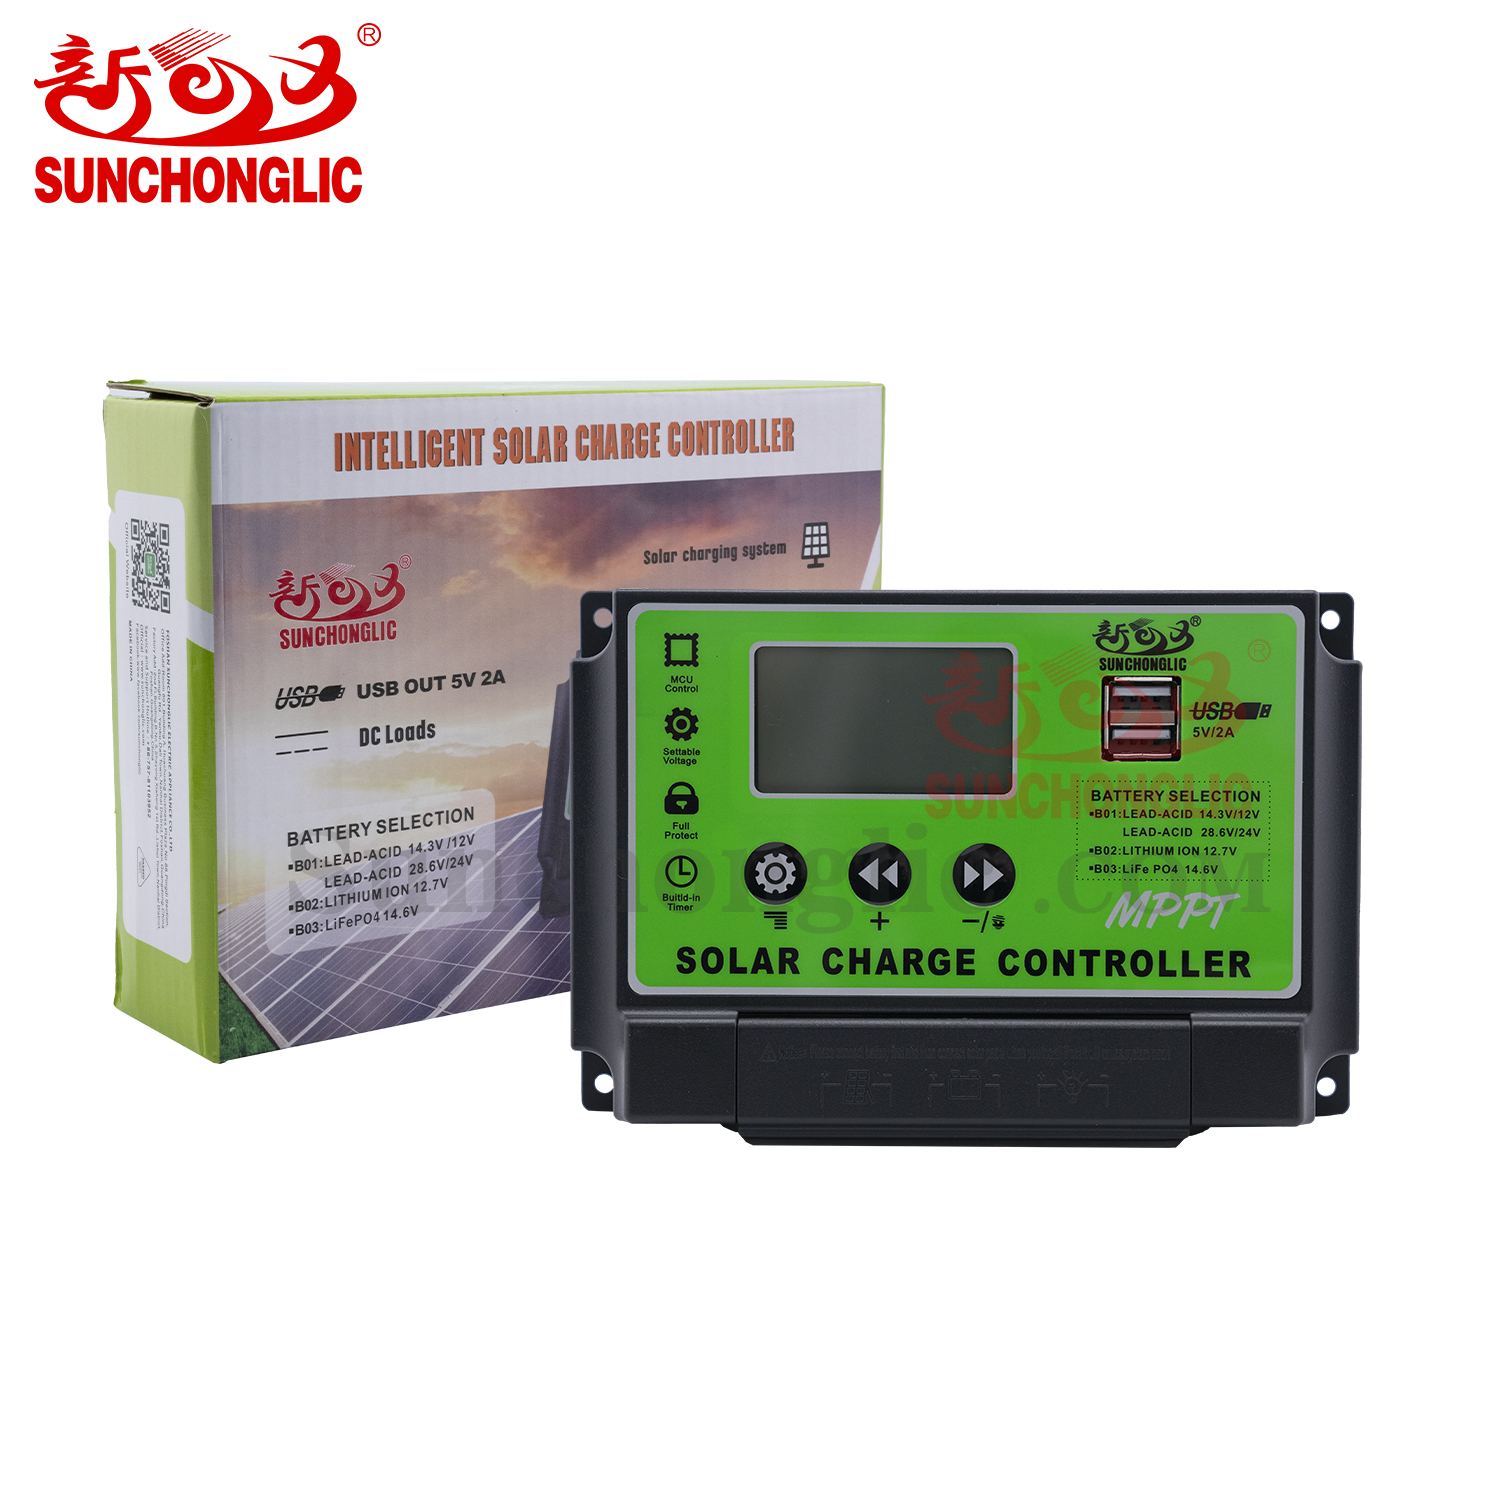 Solar Charge Controller - FT-MP1250